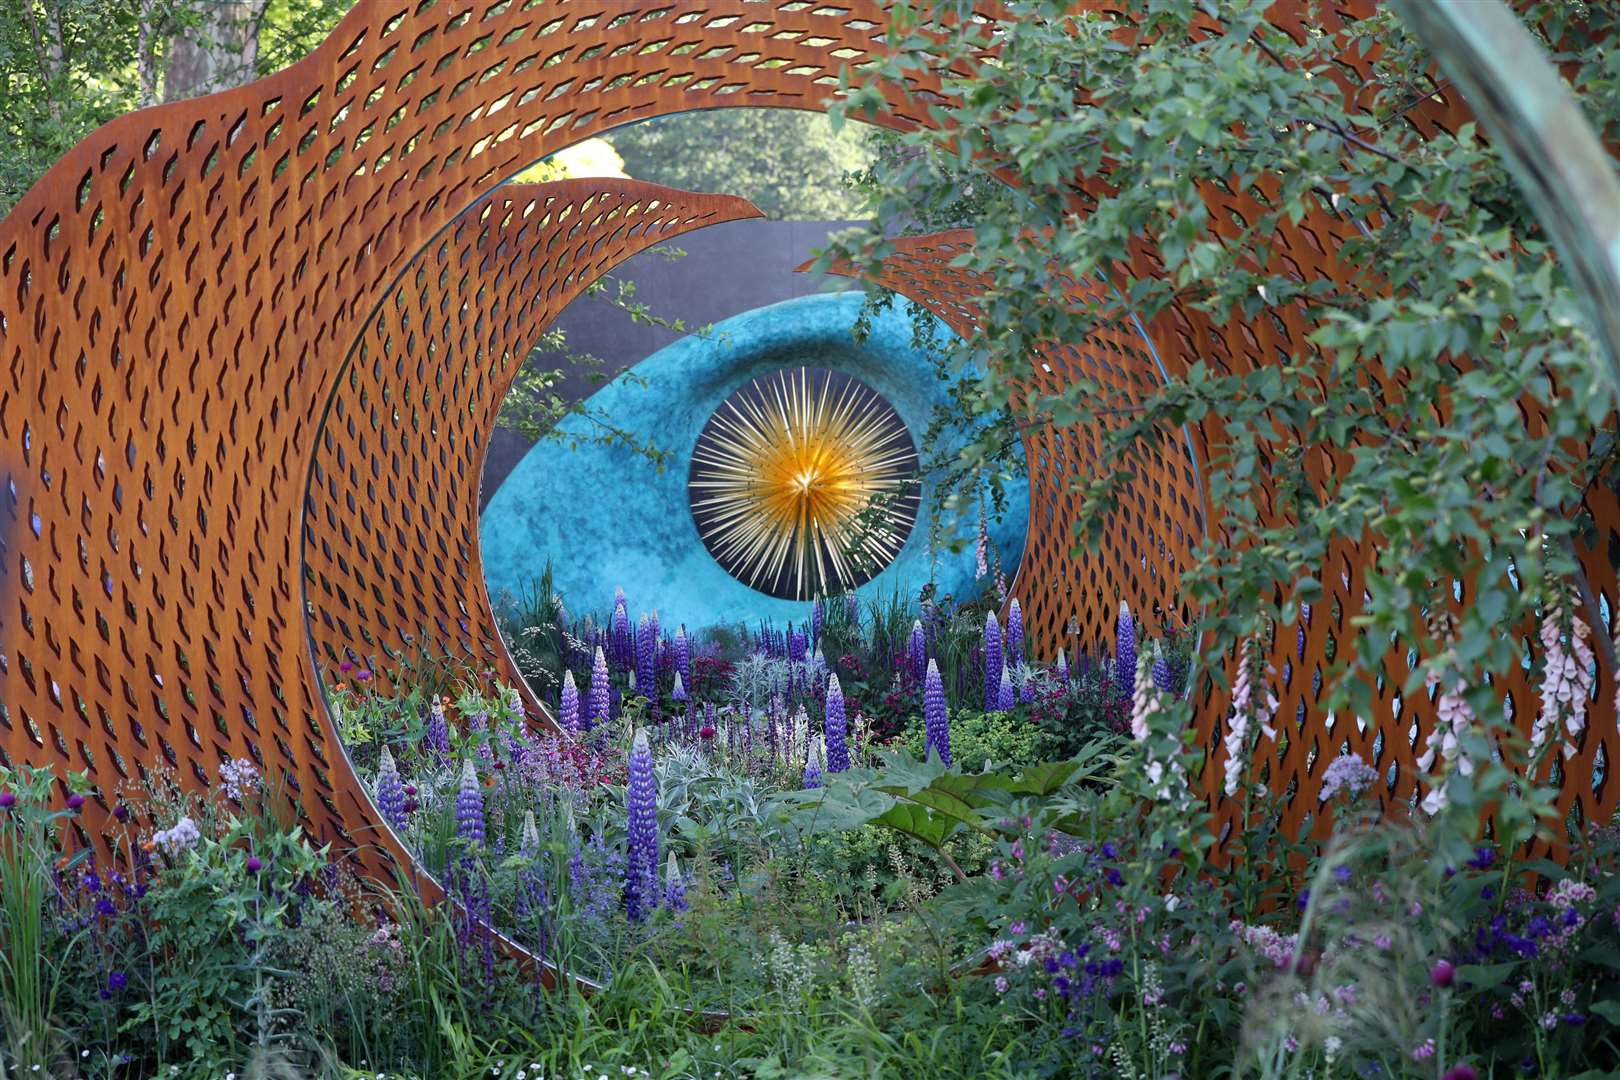 Covidsafe plans to bring back Chelsea Flower Show in 2021 unveiled